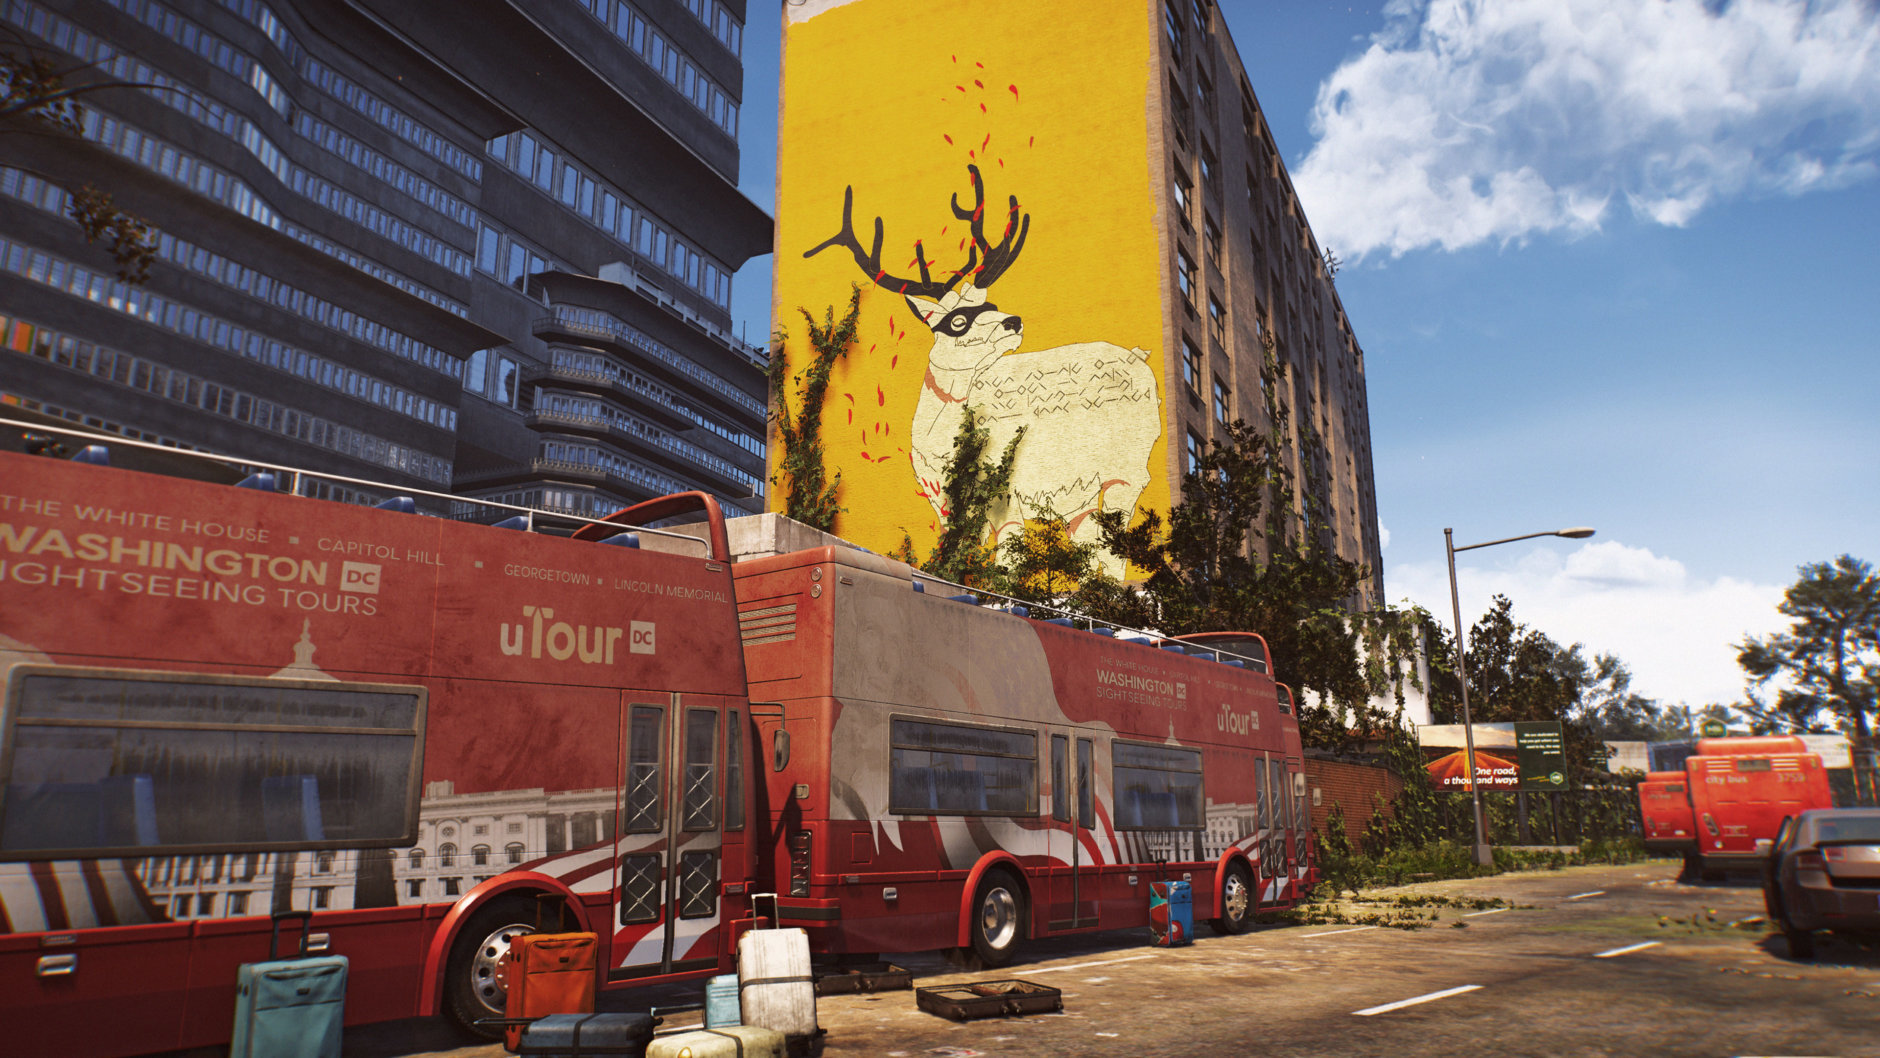 Graffiti is all over the streets of D.C. in Division 2. (Courtesy Ubisoft/Massive)